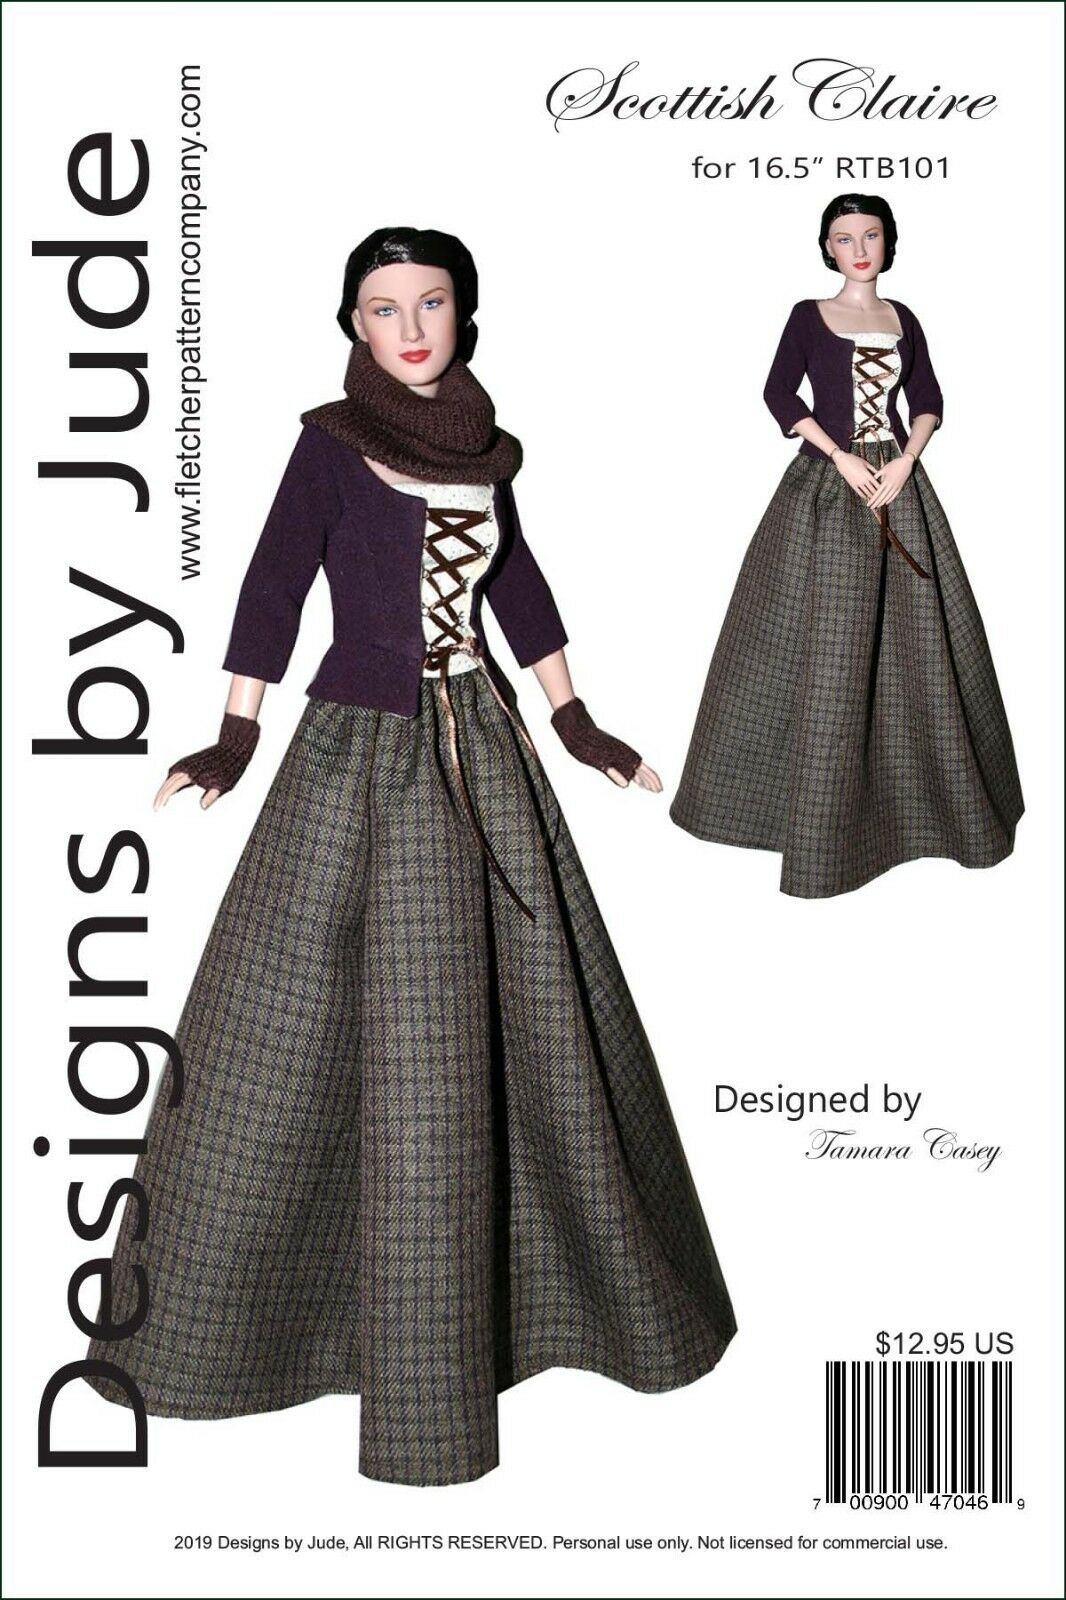 Outlander Scottish Claire Doll Sewing Pattern For Rtb101 Body Grace Tonner